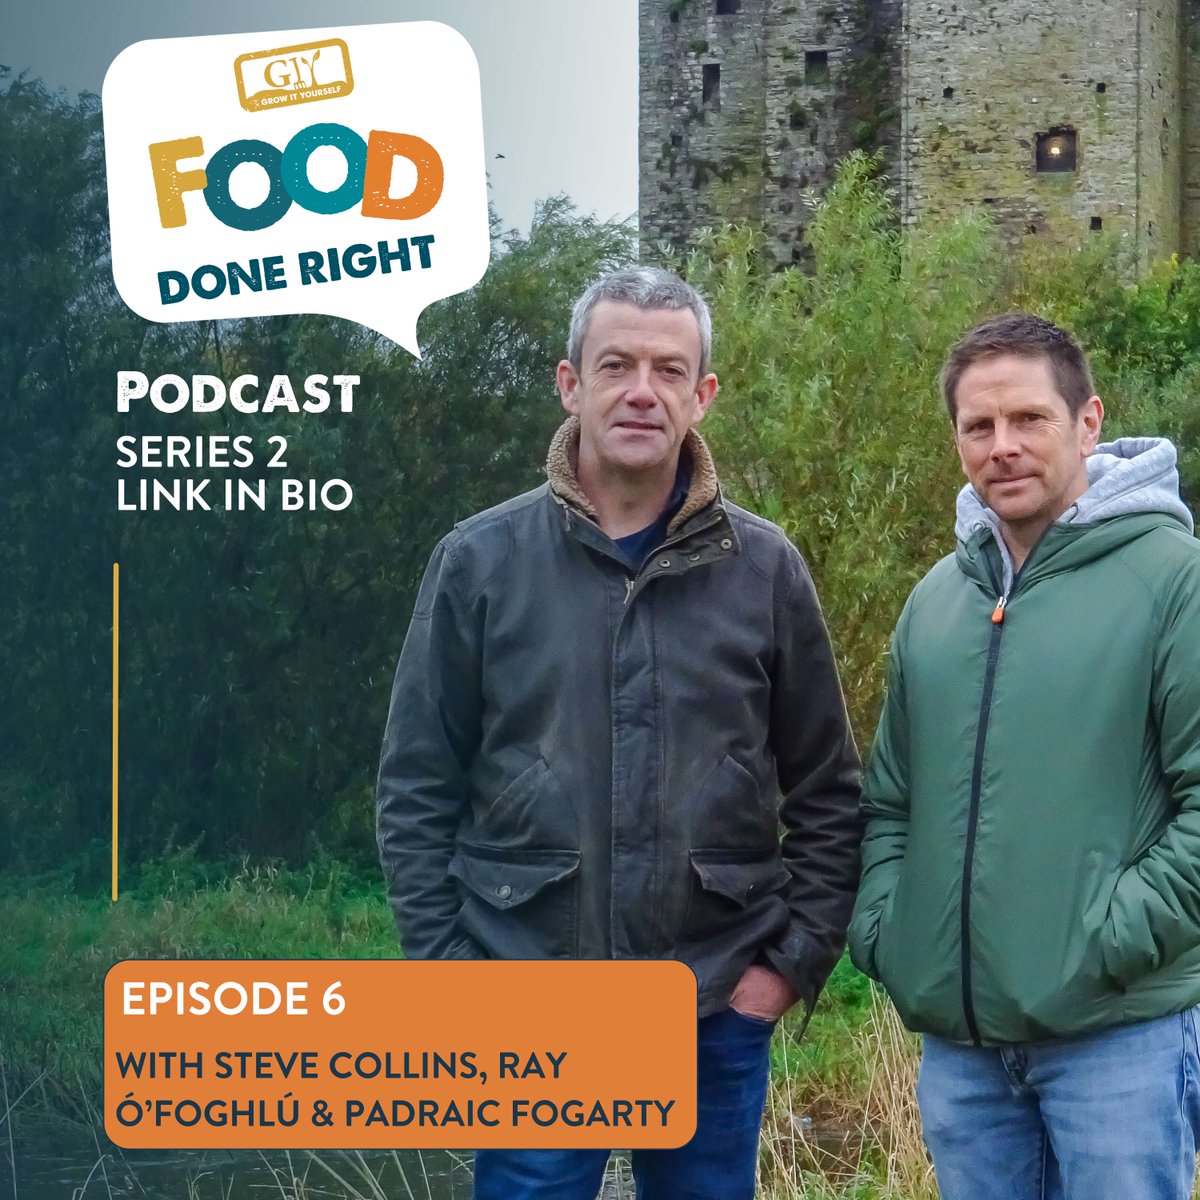 🌱 How can we encourage more effective actions around climate change & biodiversity to make them the norm rather than the exception? This and more in episode of 6 of the Food Done Right podcast with @mickkellygrows & guests > giy.ie/food-done-righ… #GIY #Podcast